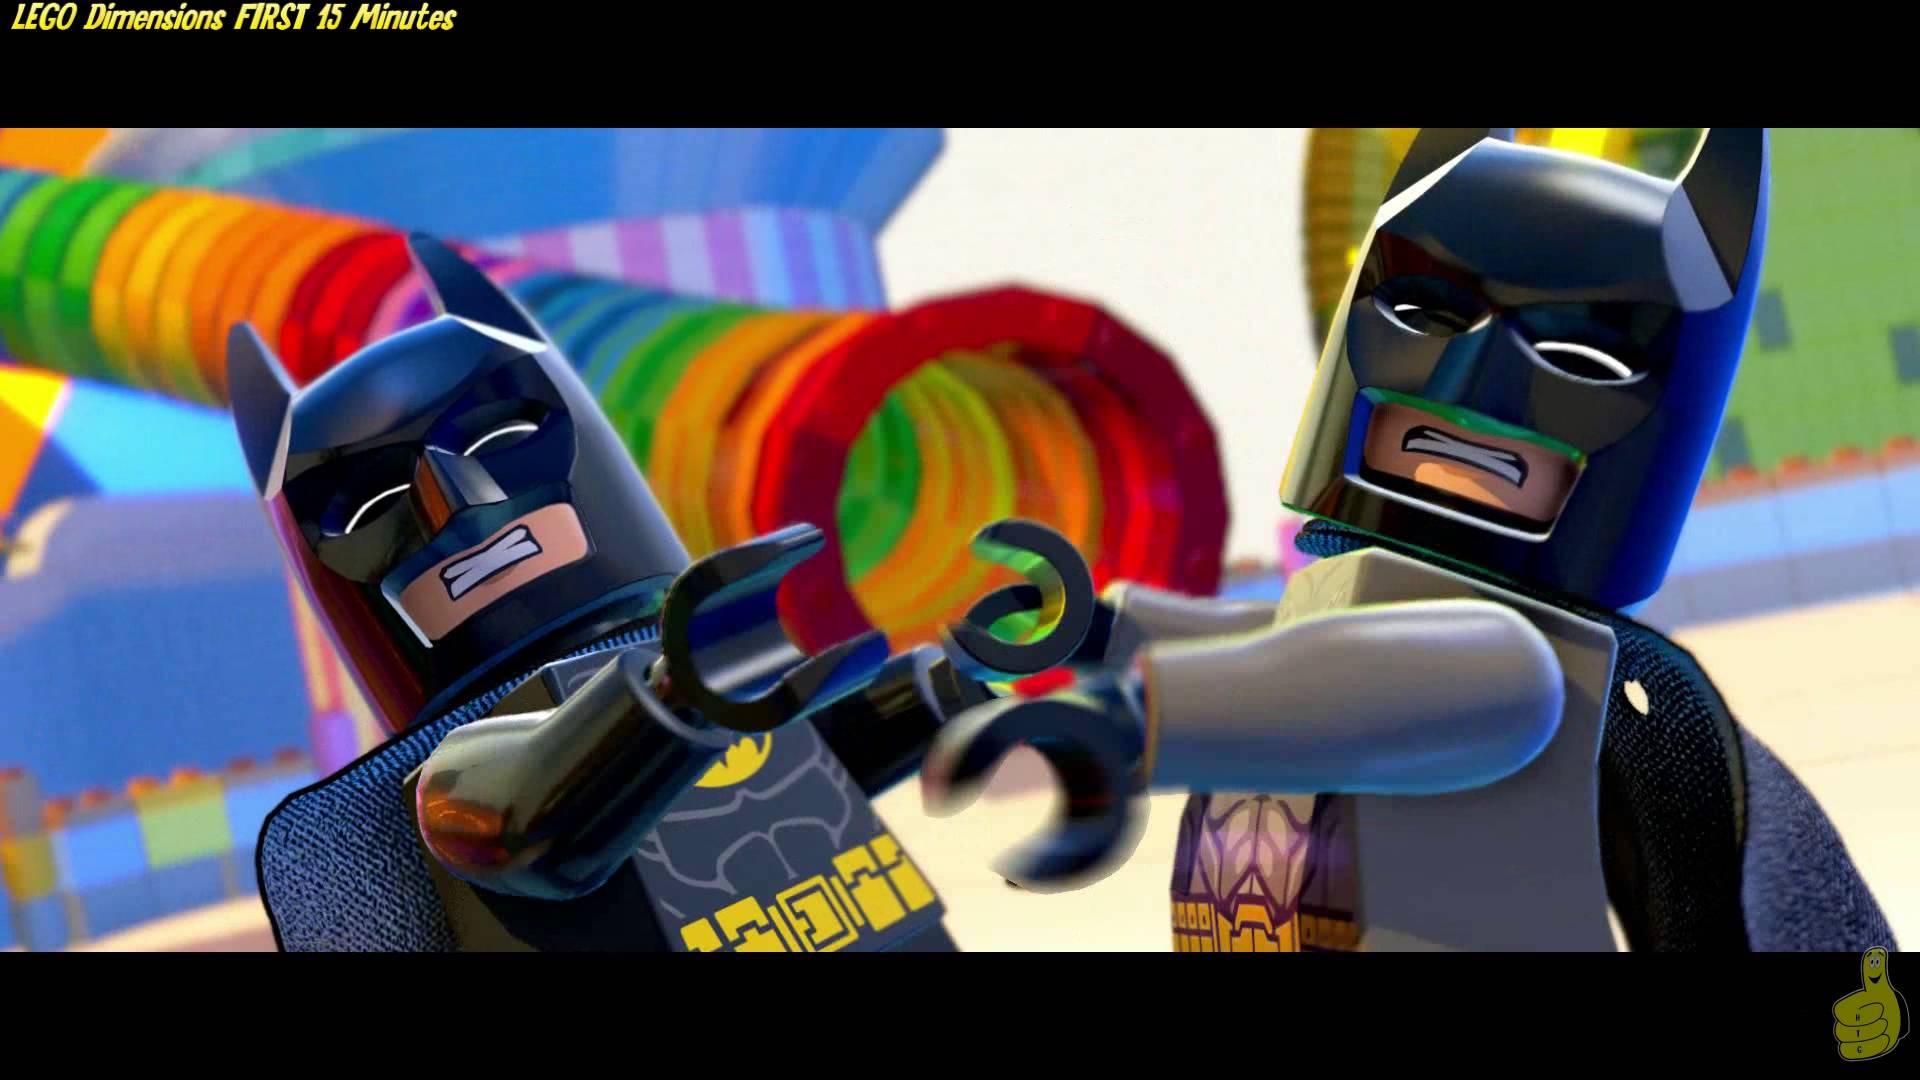 Lego Dimensions: FIRST 15 Minutes of Lego Dimensions Gameplay – HTG